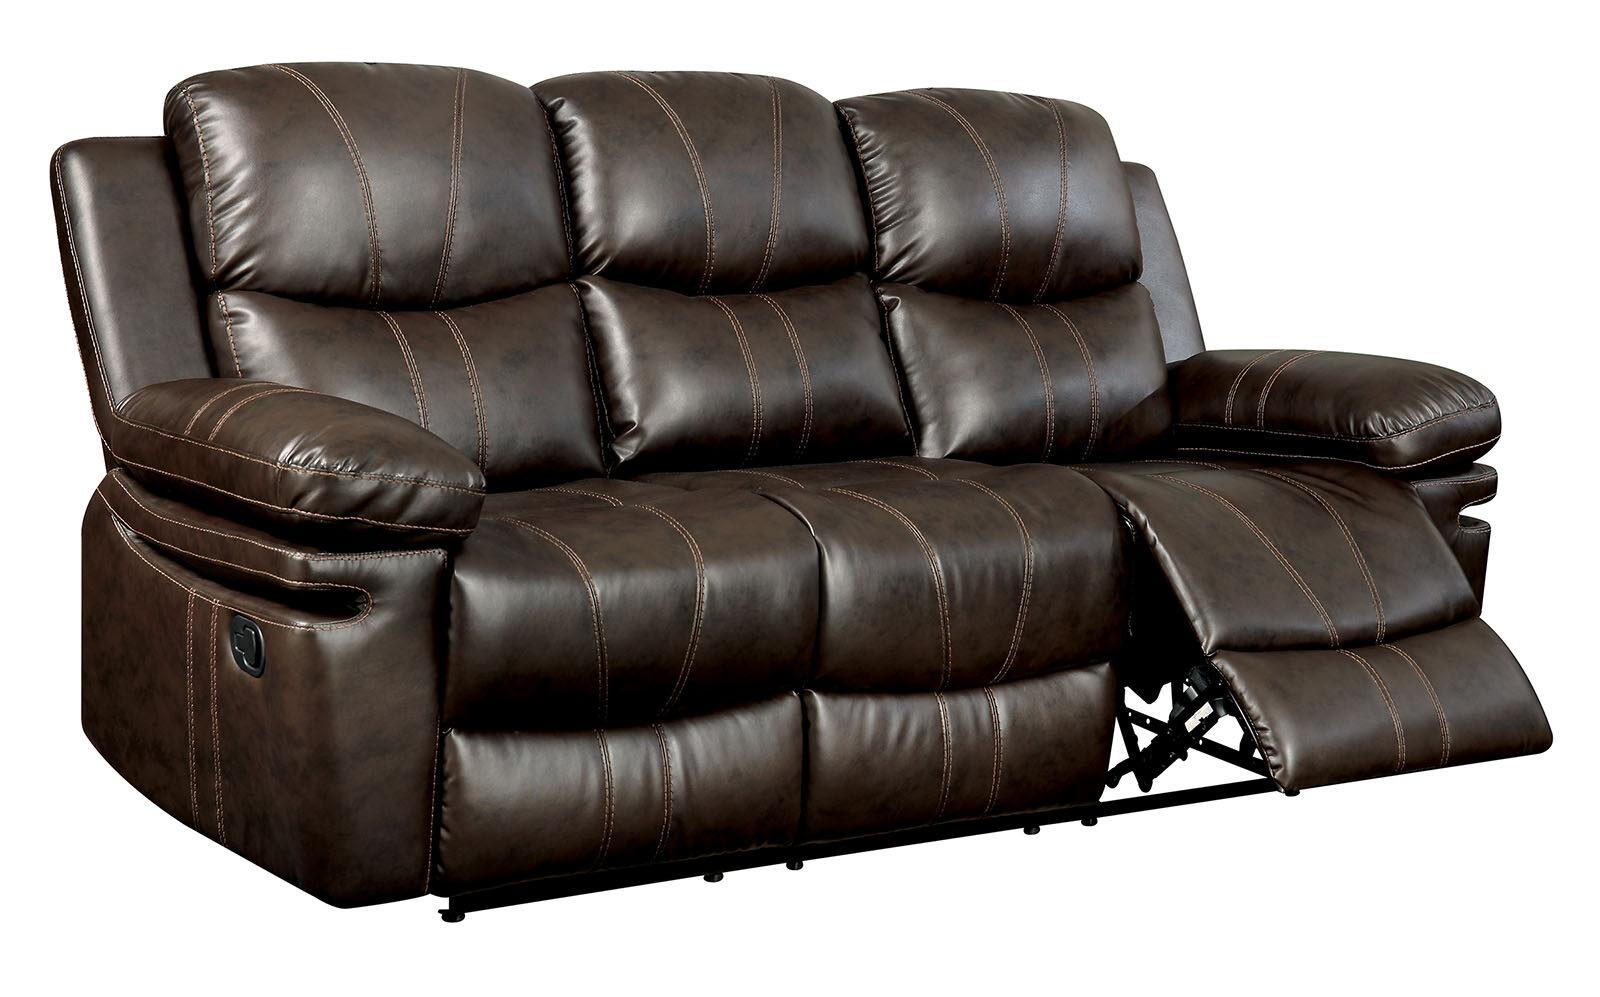 Transitional Recliner Sofa LISTOWEL CM6992-SF CM6992-SF in Brown Bonded Leather